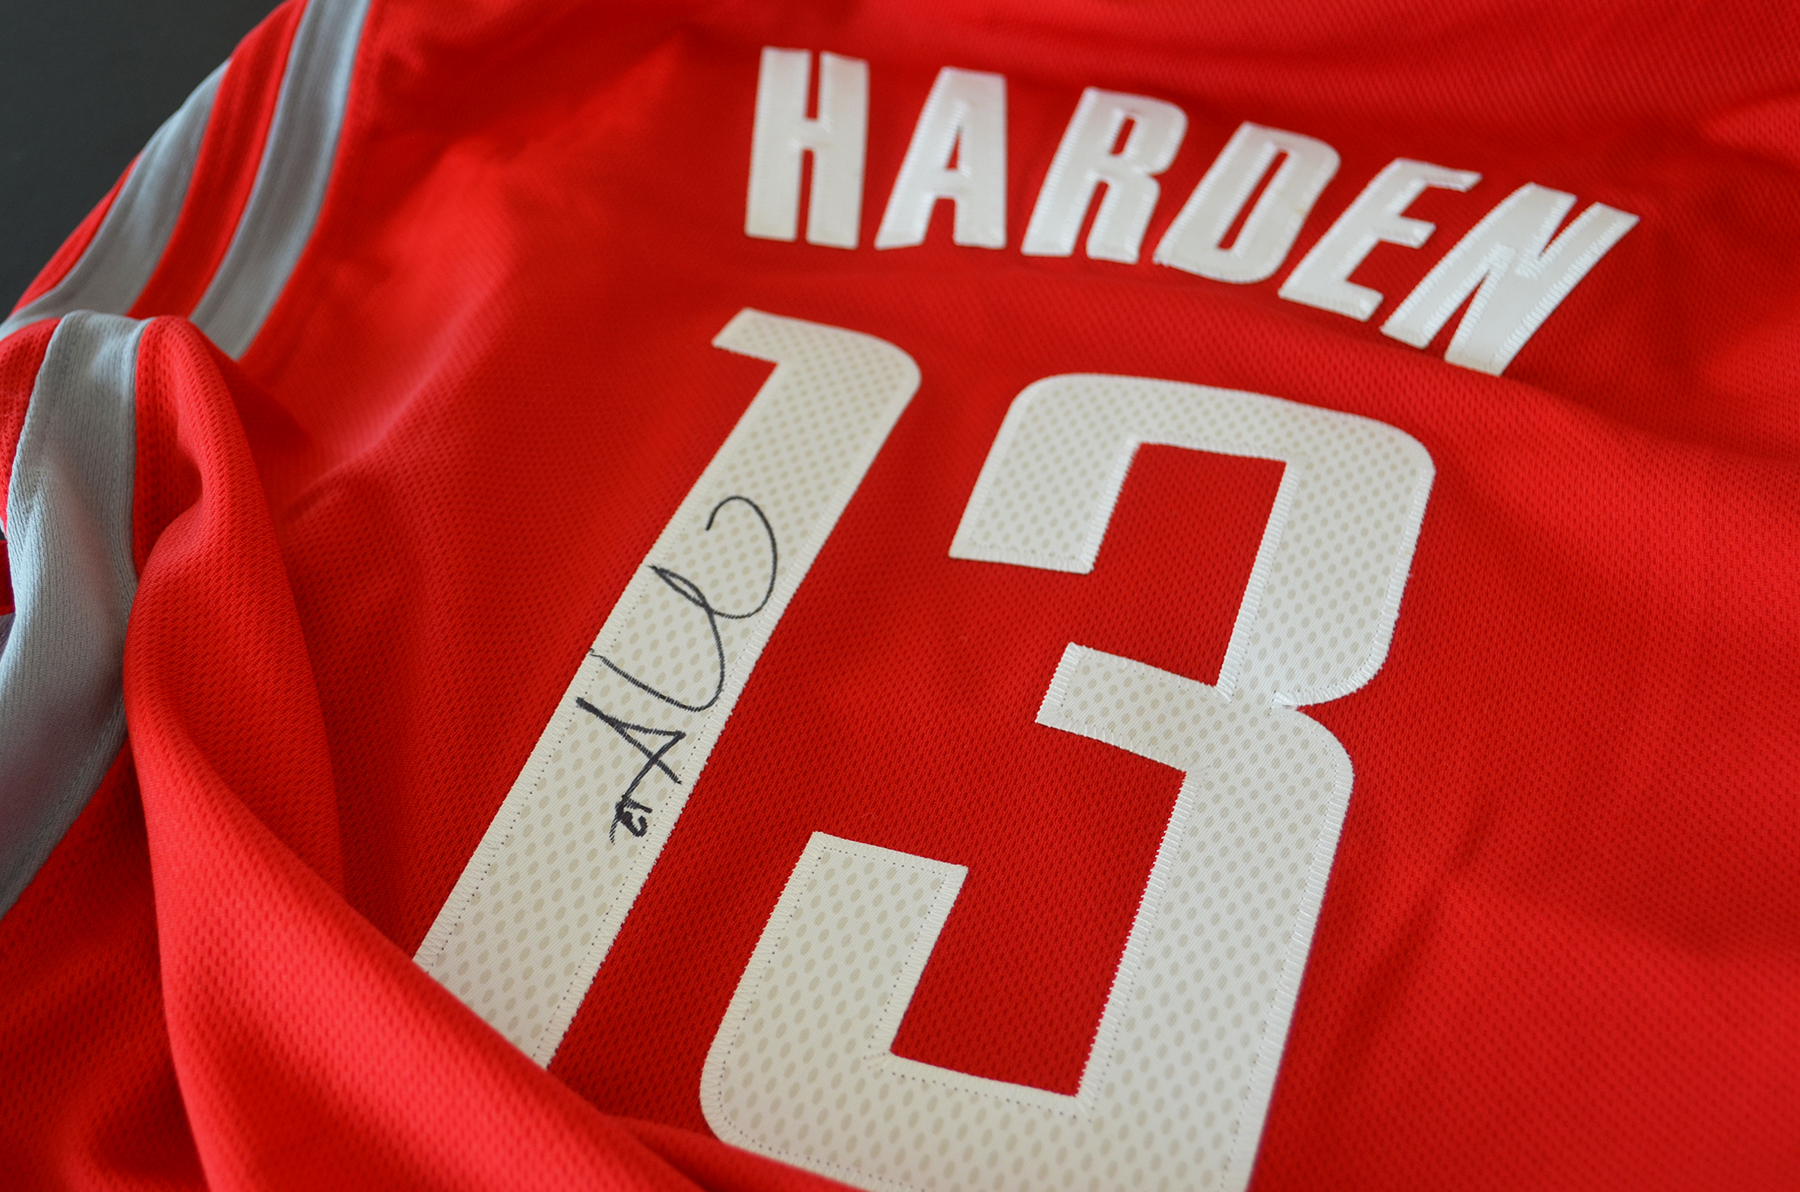 harden signed jersey